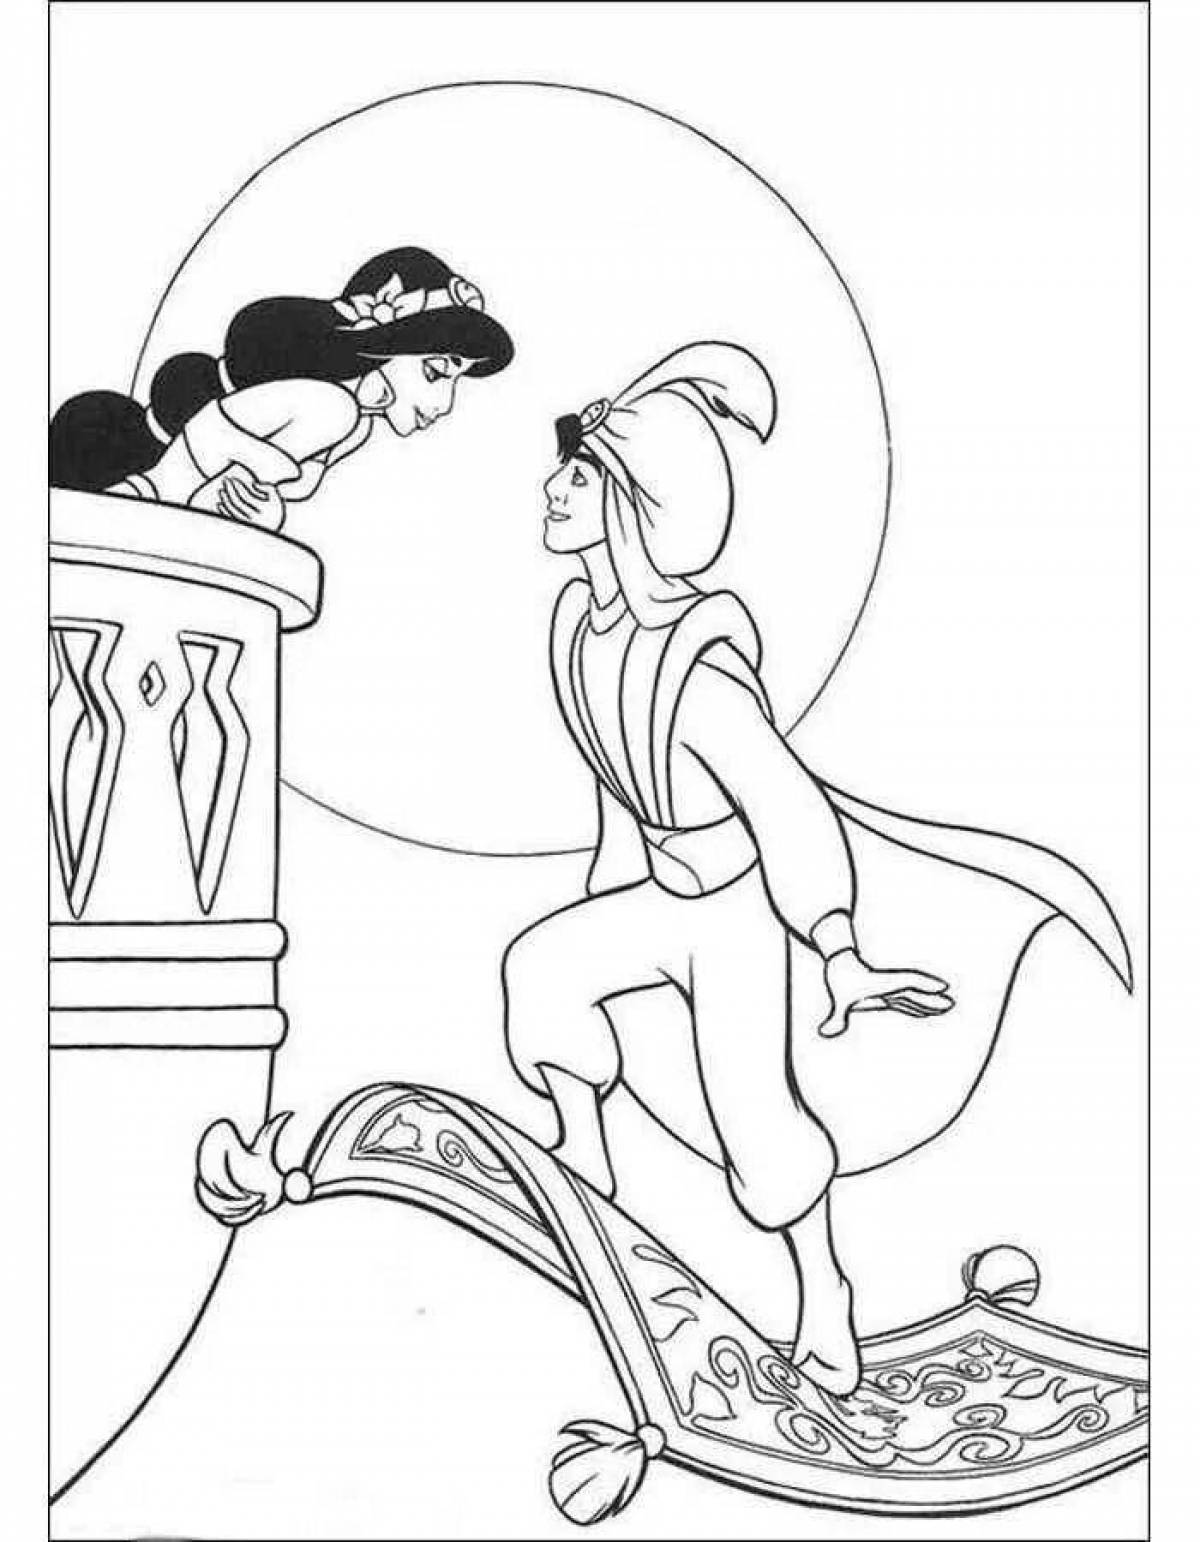 Fancy aladin coloring book